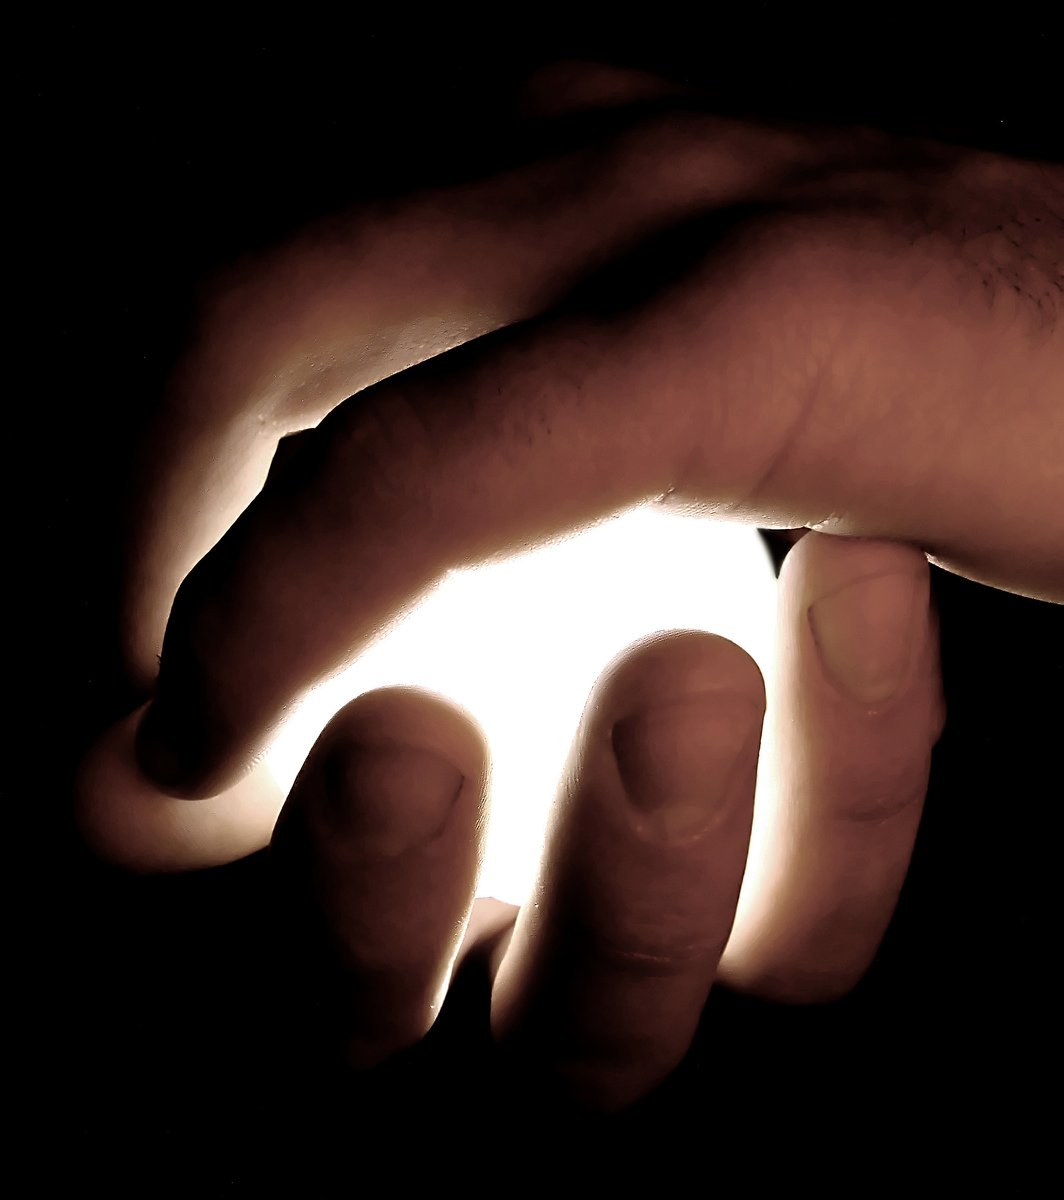 person holding a lit object up to the light